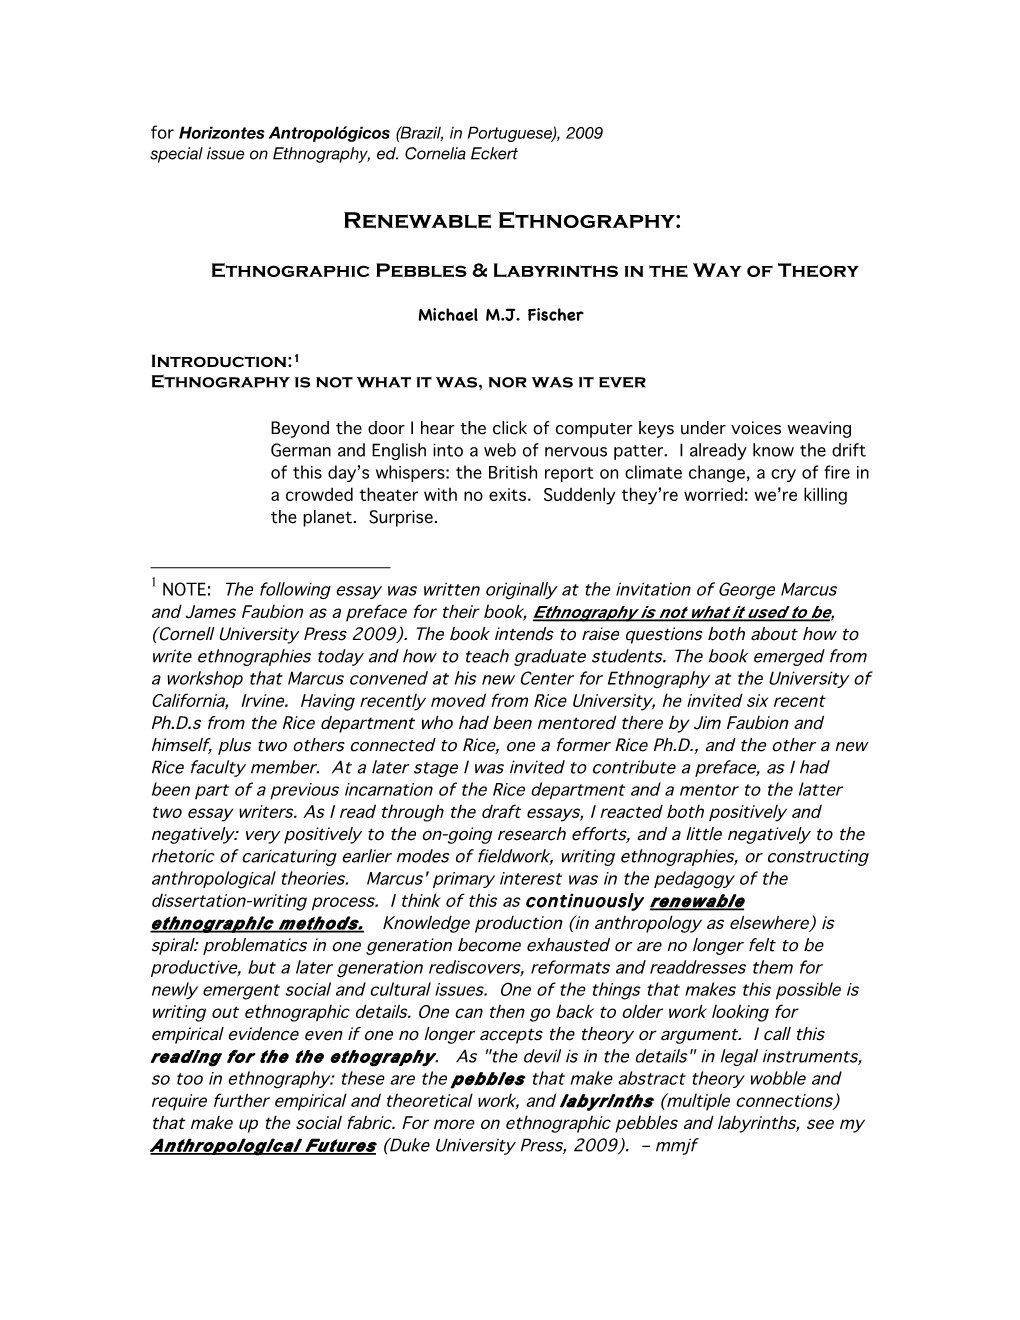 Fischer Renewable Ethnography (Expanded Vers)